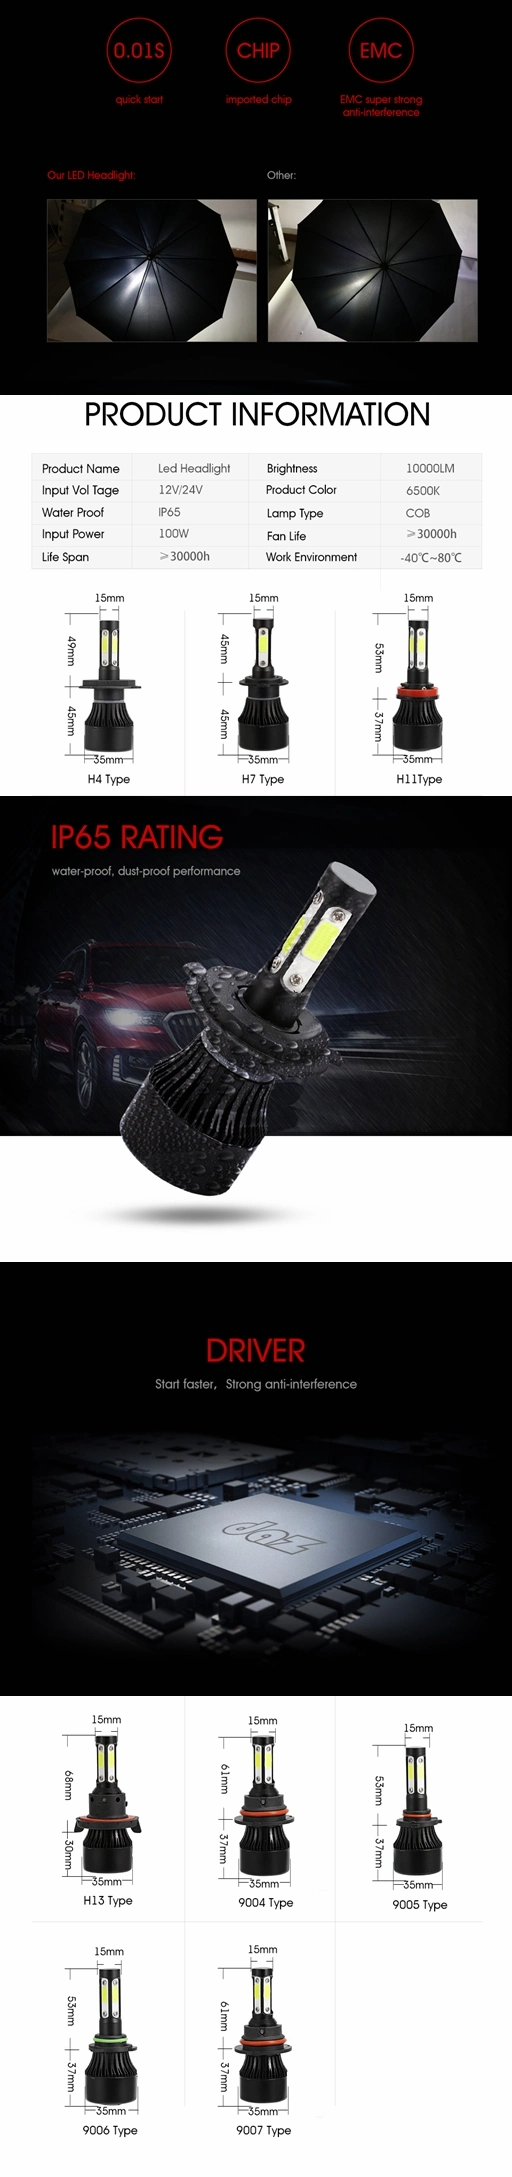 Hot Sale High Quality Black Automobile Motorcycle Truck Lights LED Headlight IP67 Waterproof X7 H4 H7